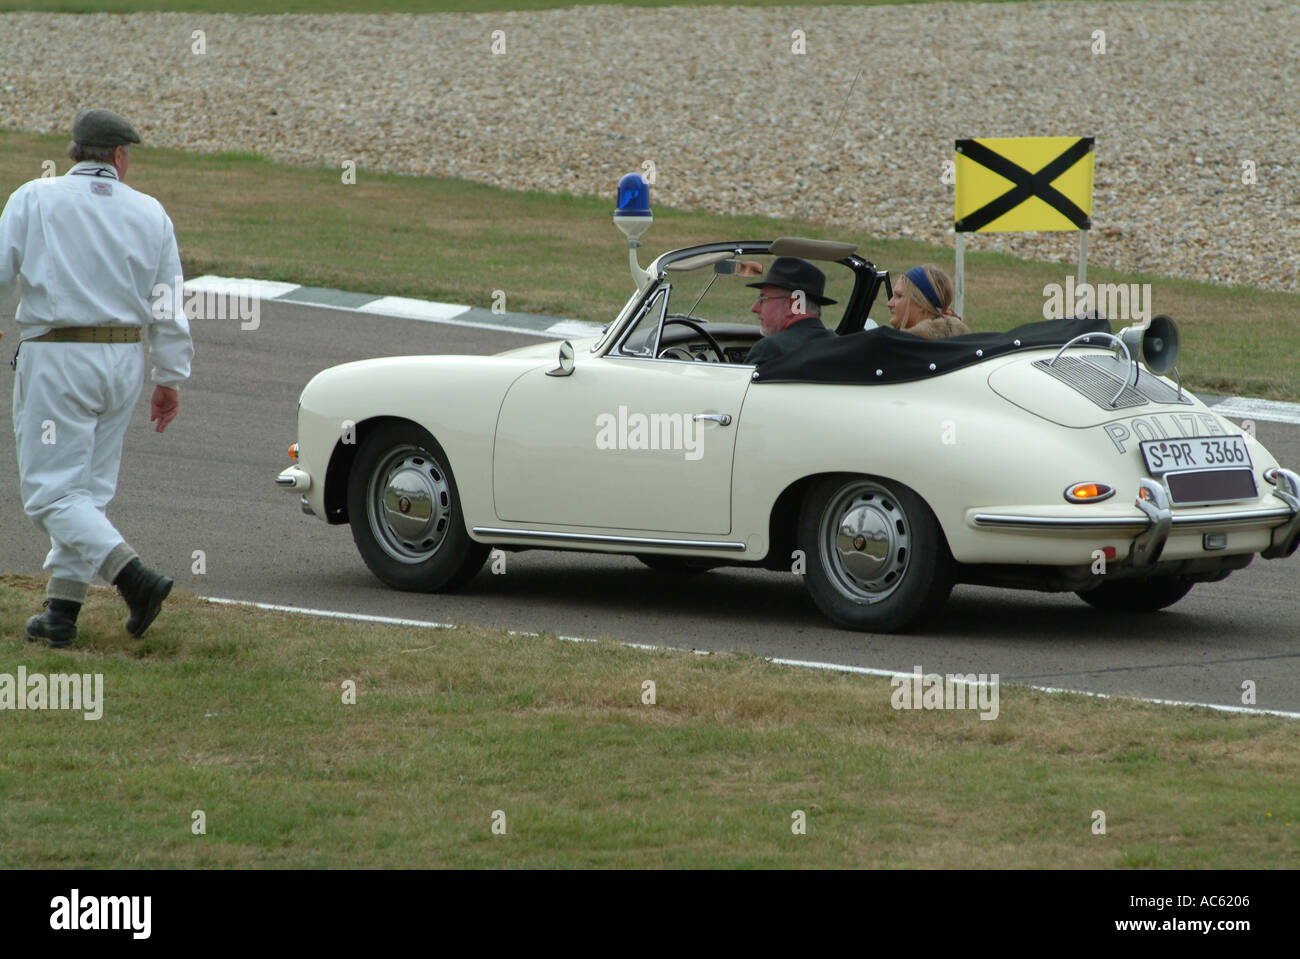 Porsche Police Sports Car at Goodwood Revival Motor Racing Meeting 2003 West Sussex England United Kingdom UK Stock Photo